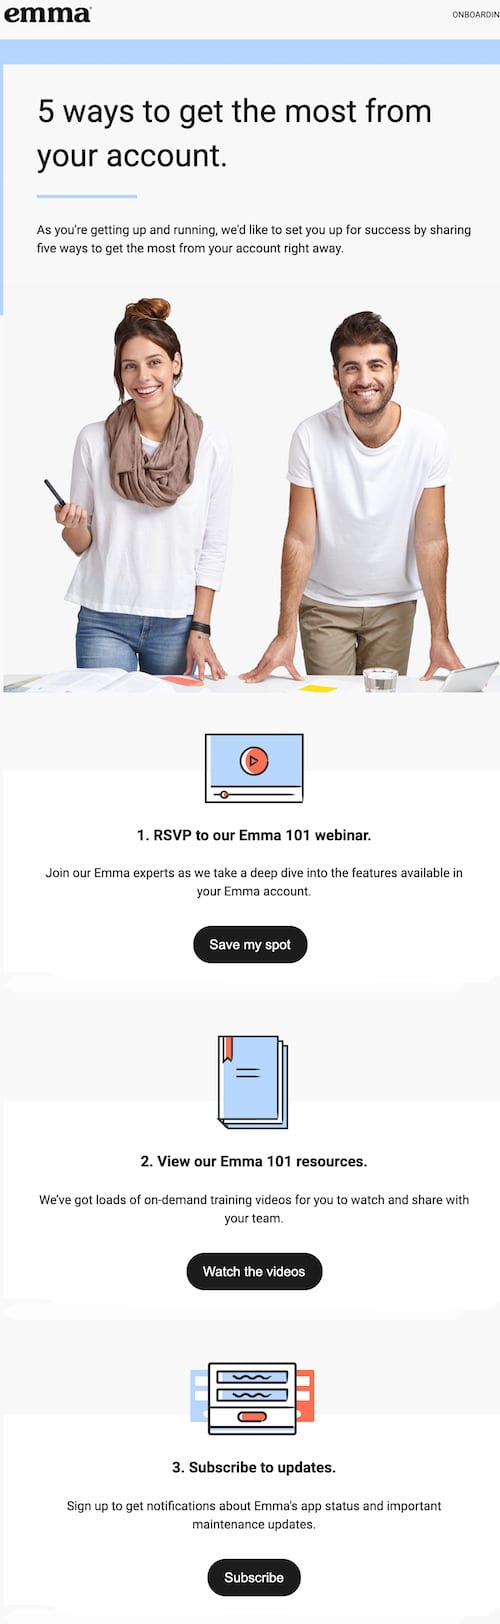 content-based-email-example: Here’s an example of Emma’s content-based automated email.